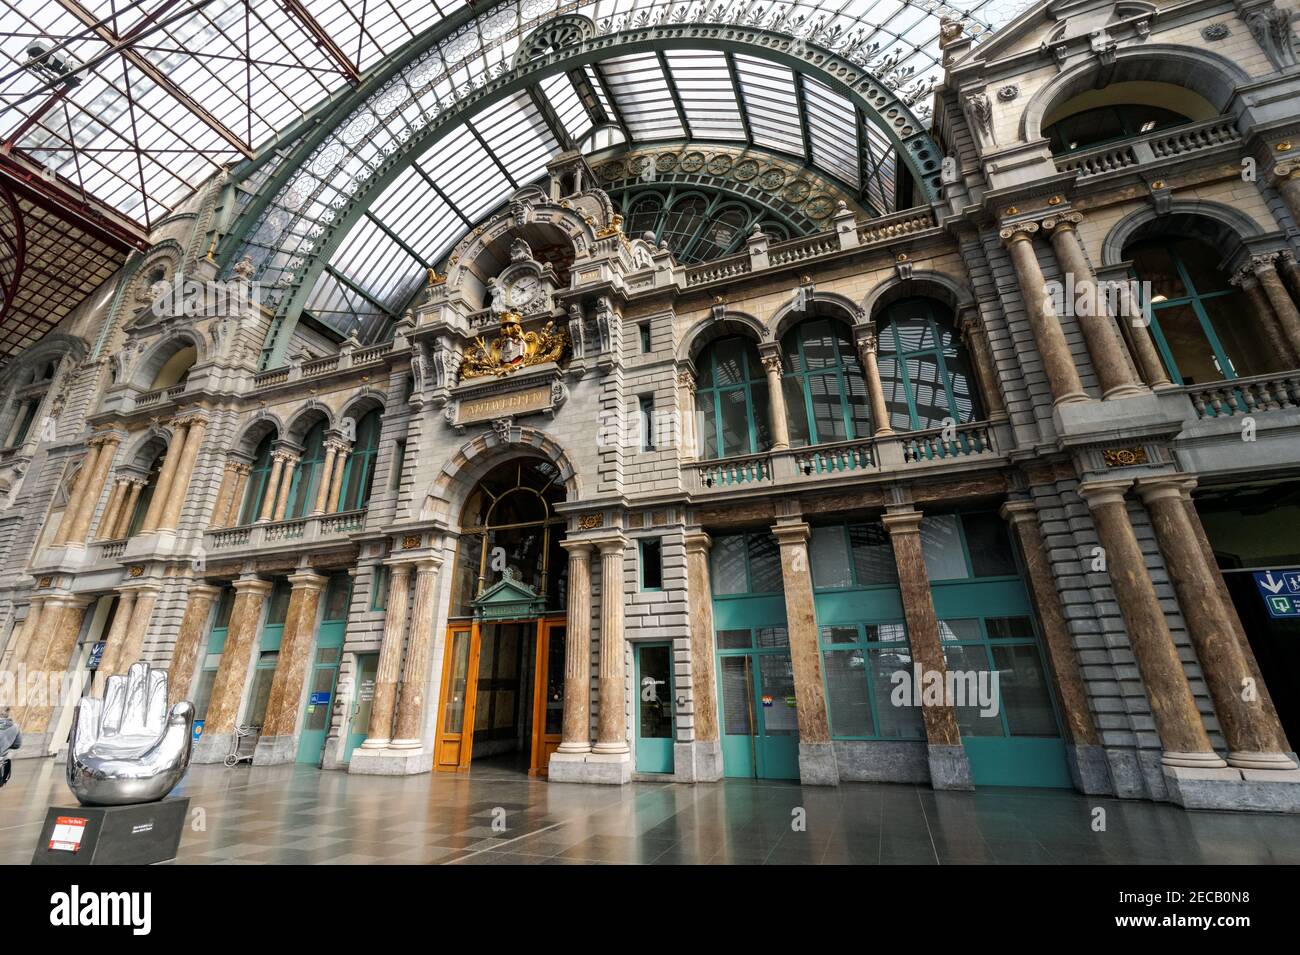 The clock at the upper level of the Antwerp Central Station, Belgium Stock Photo